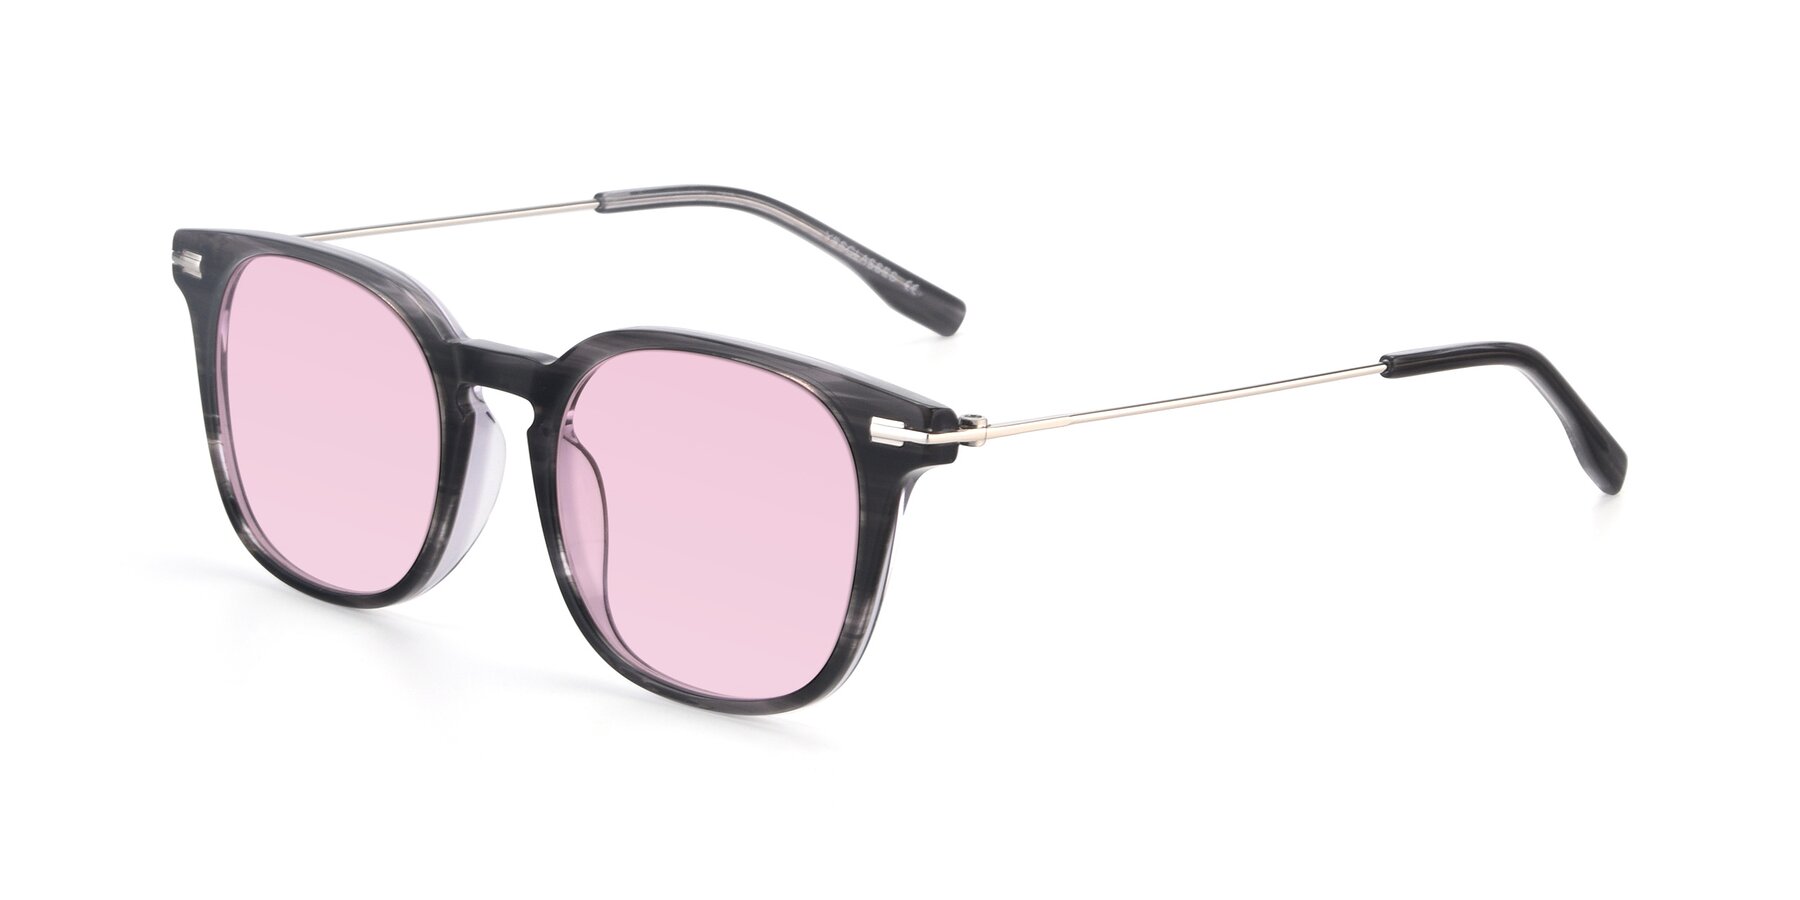 Angle of 17711 in Grey with Light Pink Tinted Lenses